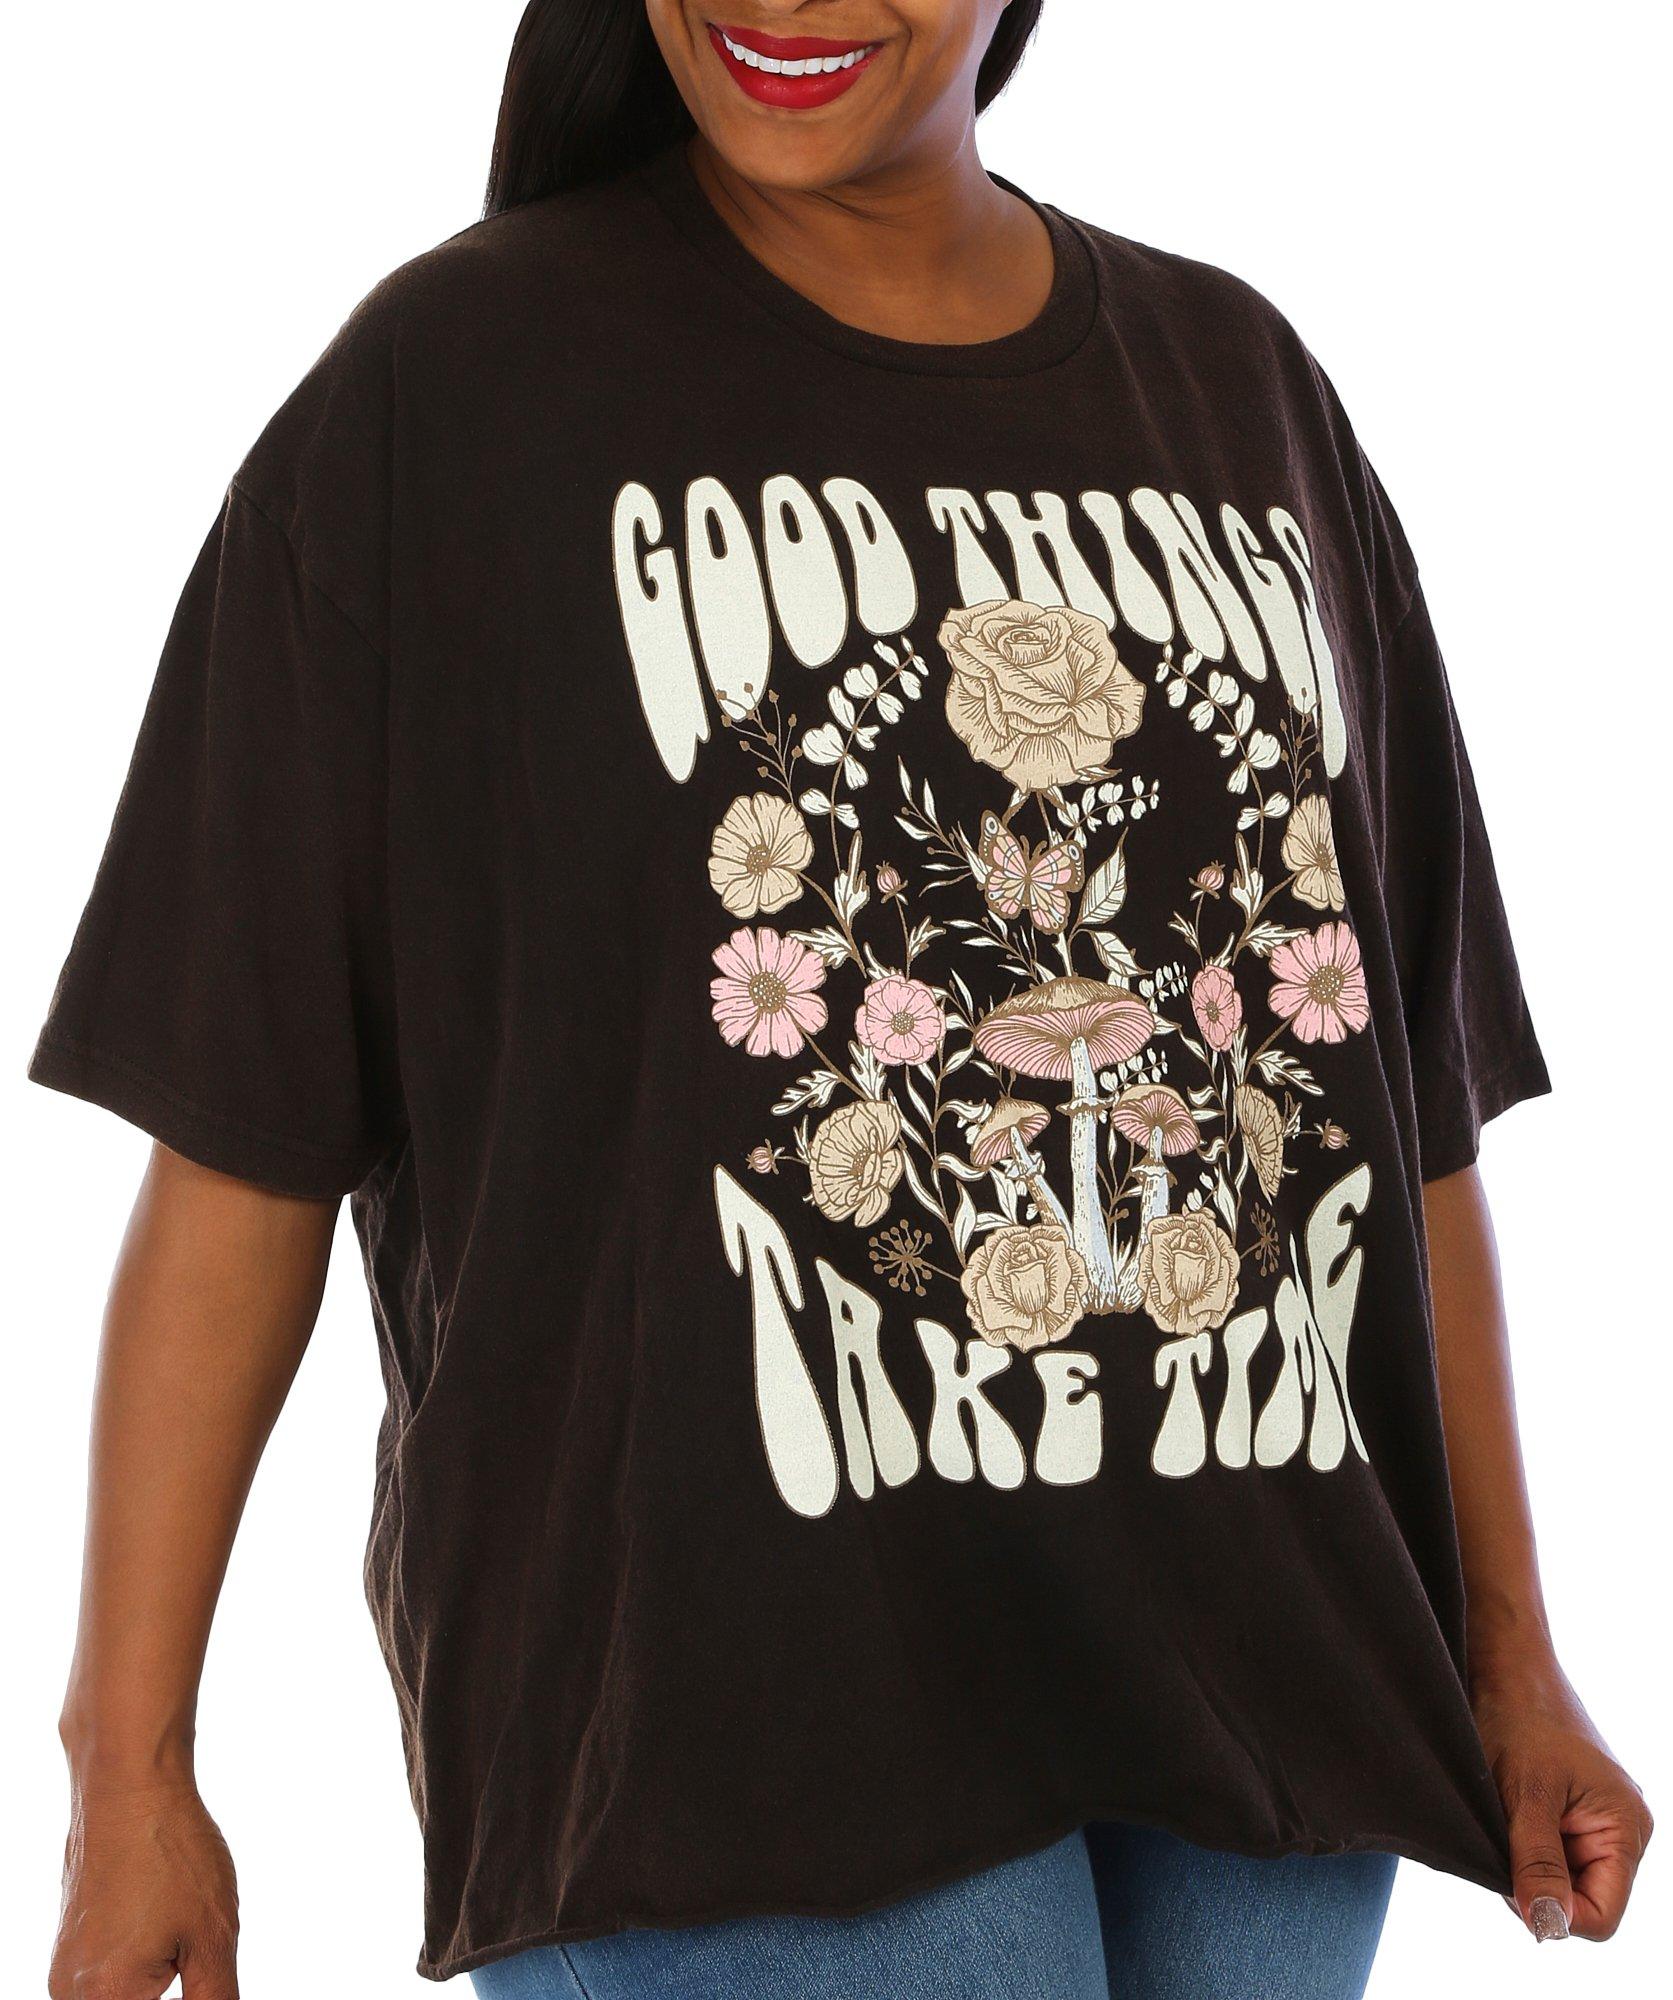 Juniors Plus Good Things Floral Graphic Tee